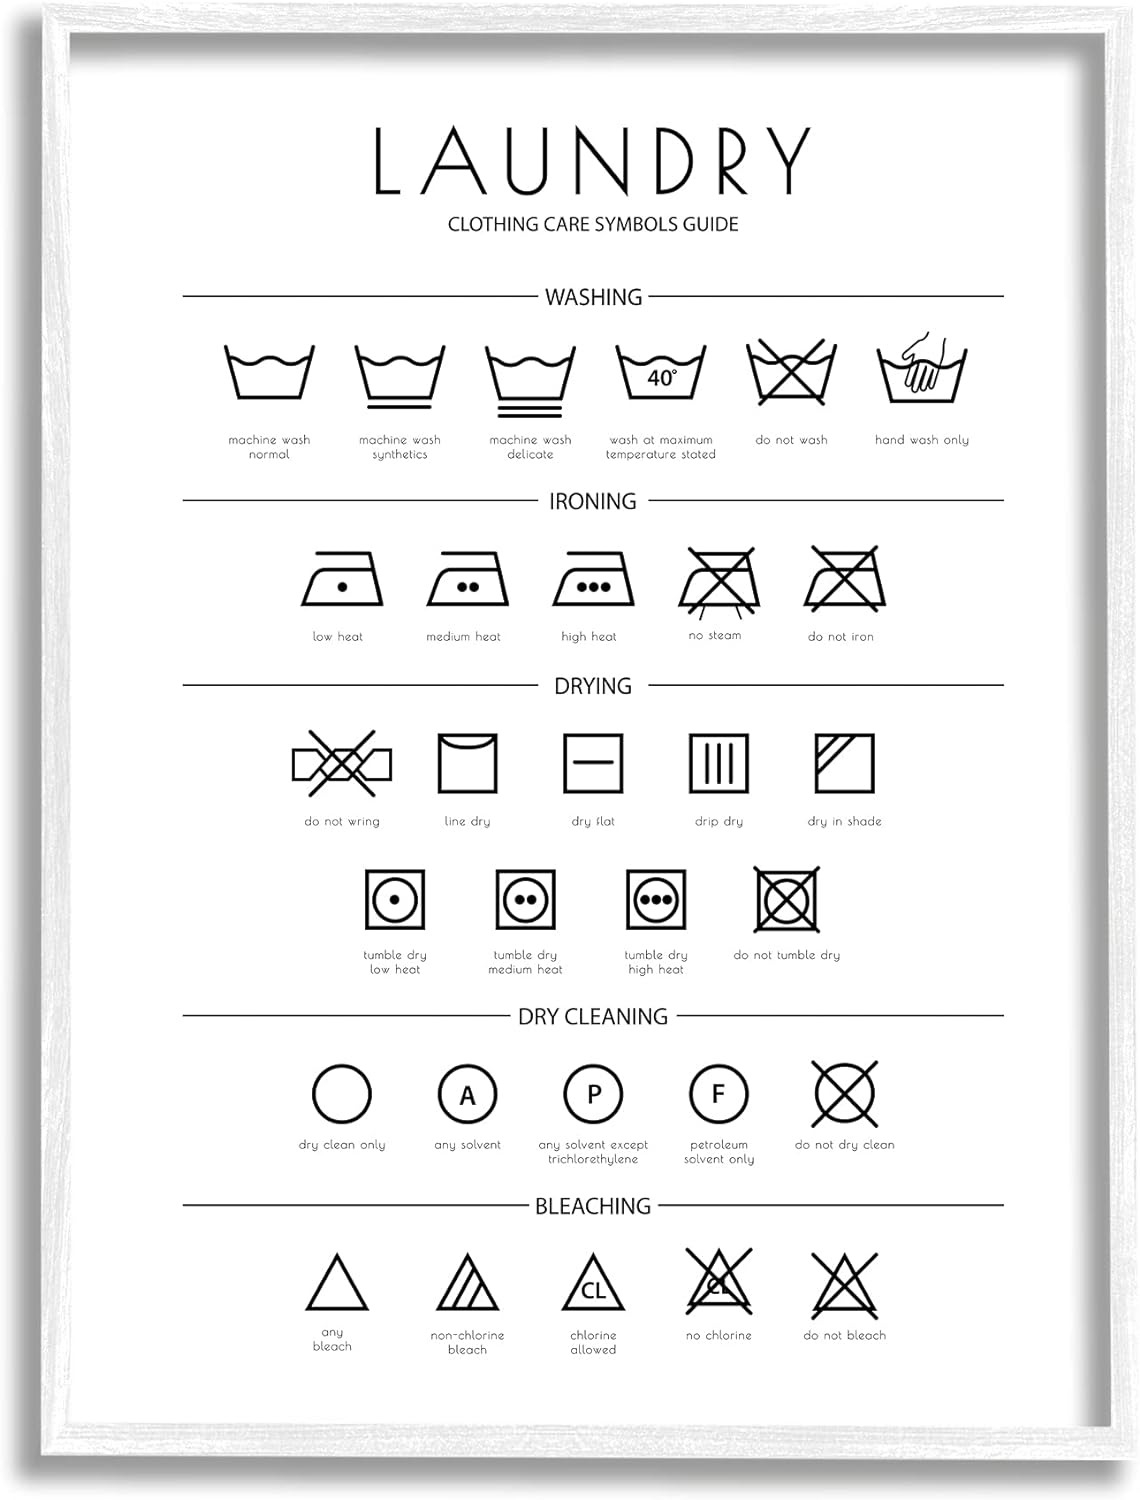 The symbol guide with a variety of different laundry symbols and what they mean in a white frame